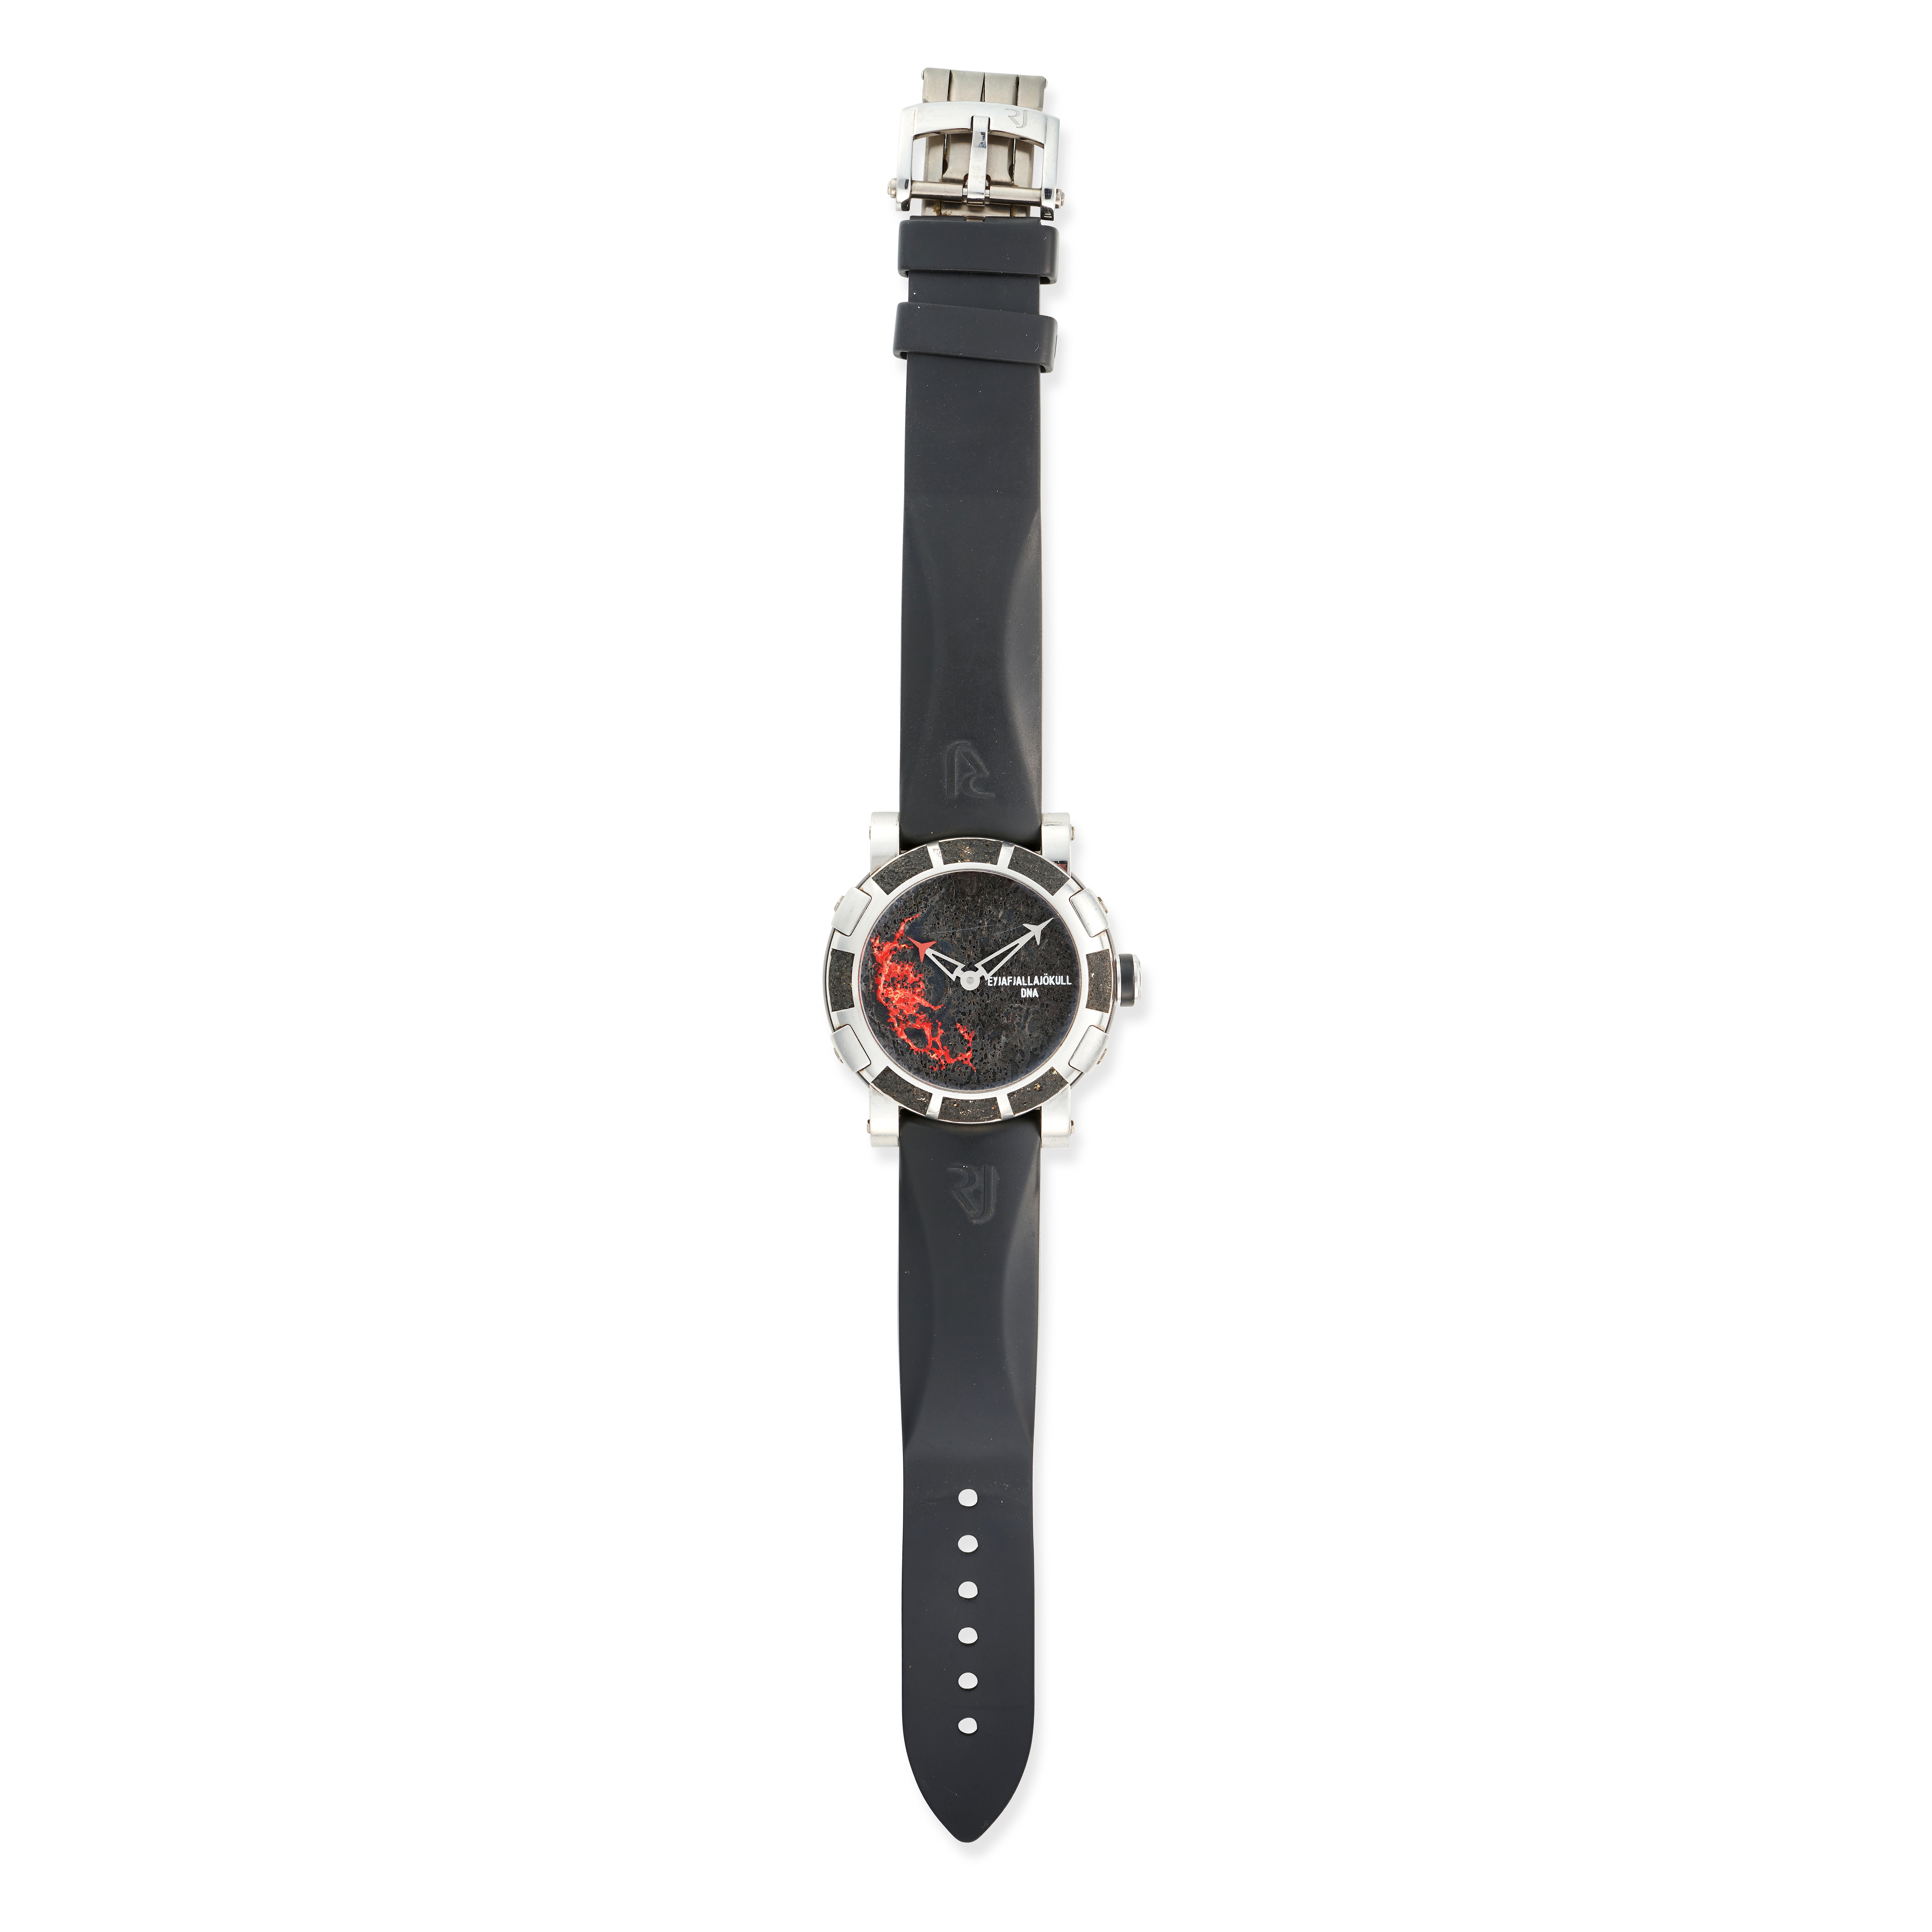 ROMAIN JEROME - A ROMAIN JEROME WRISTWATCH in lava stone dial with hand-painted red and yellow en...